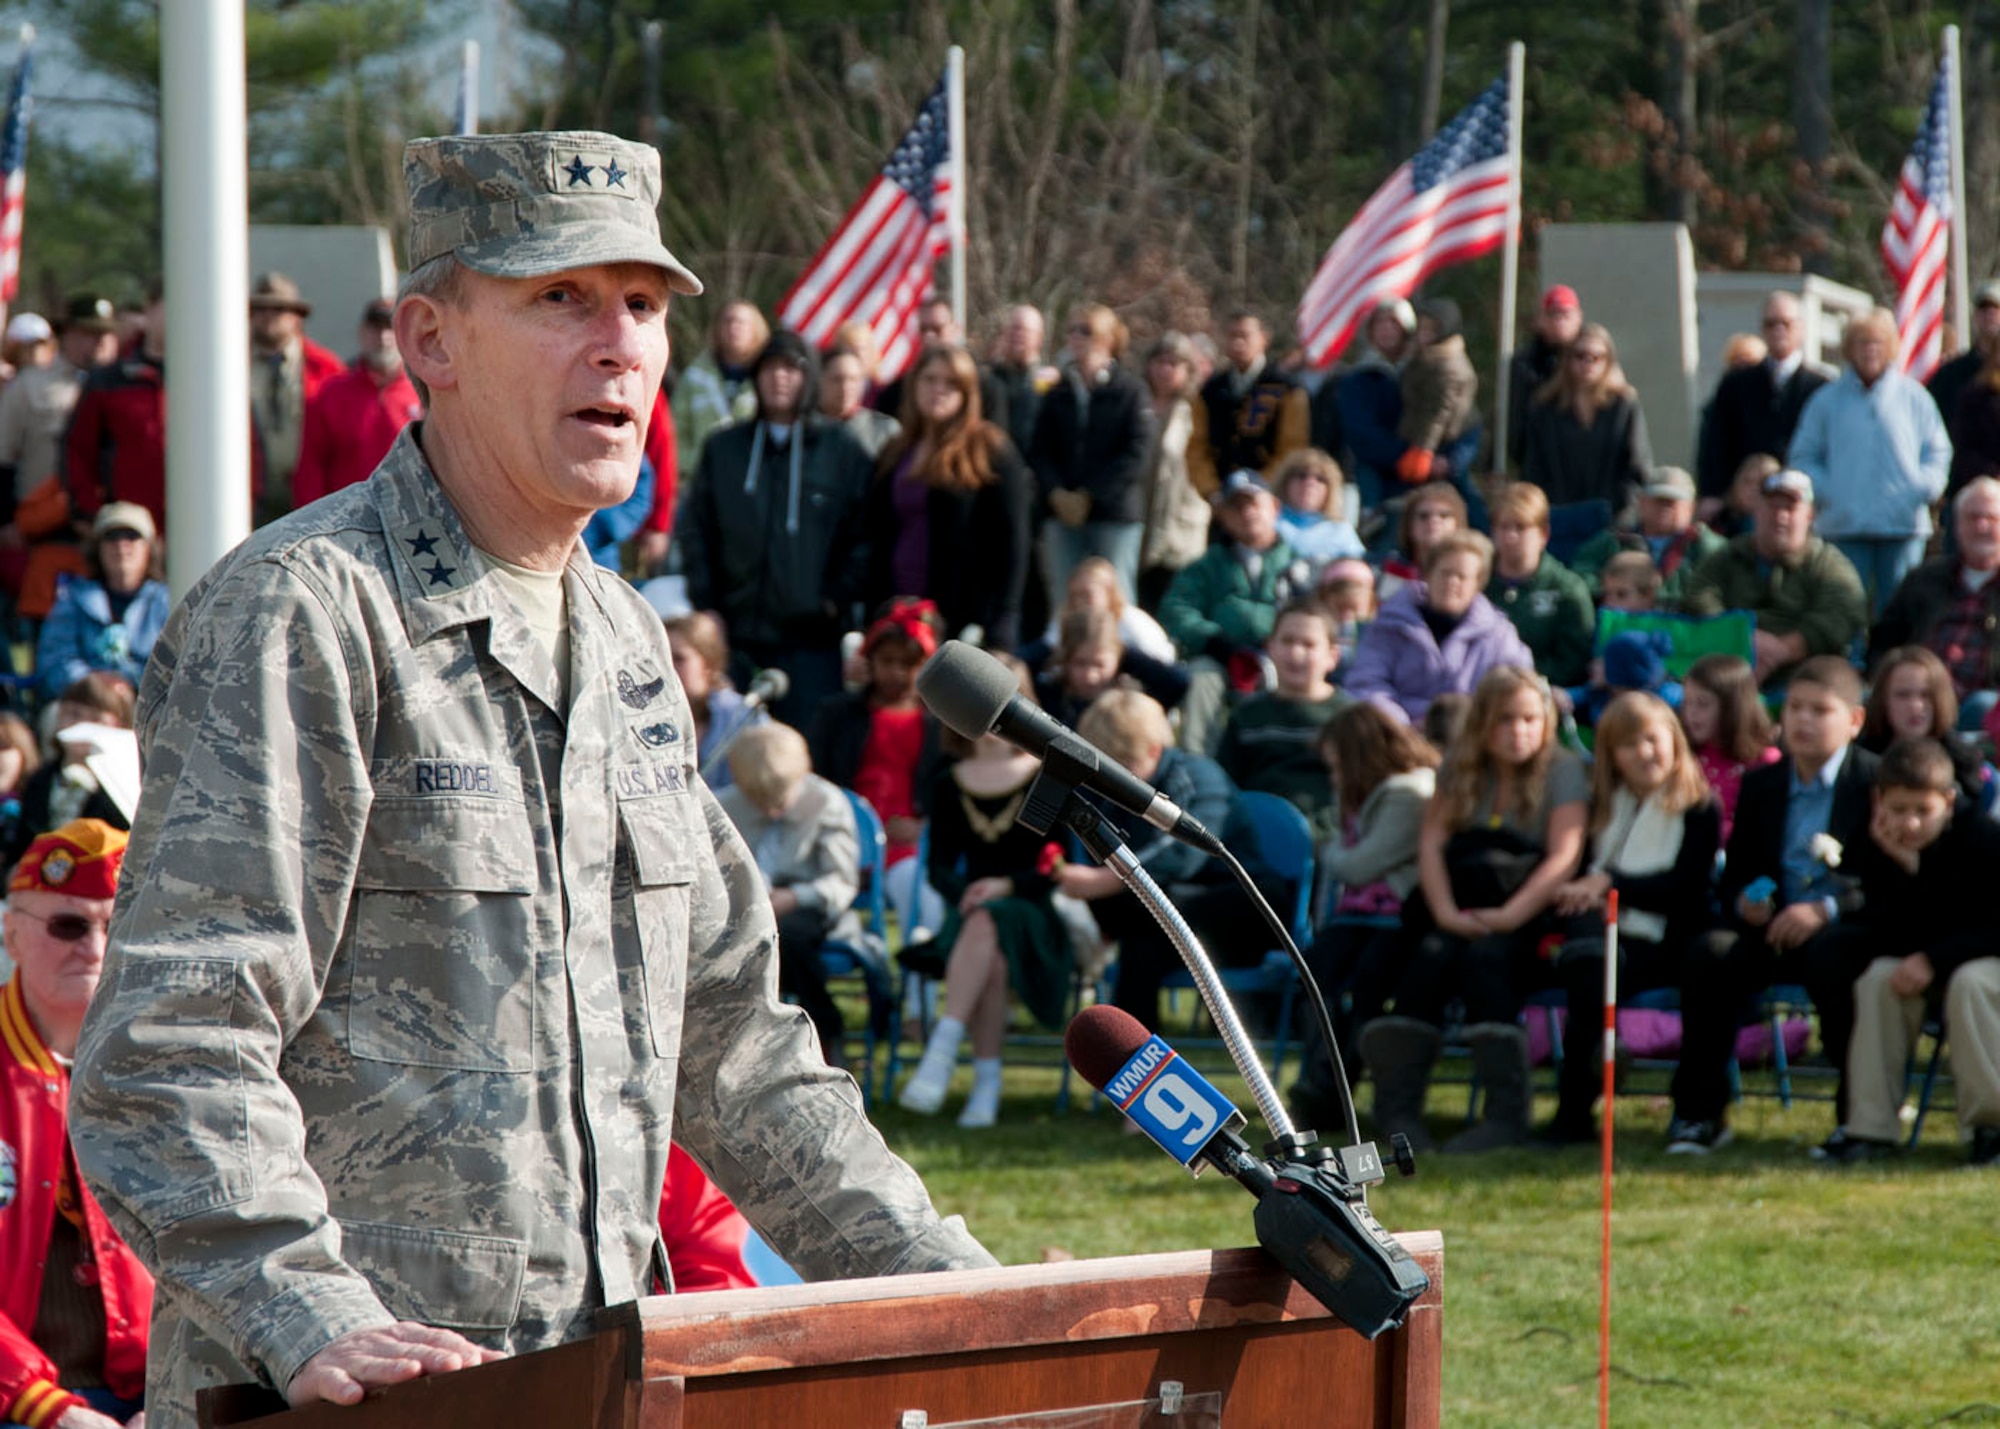 BOSCAWEN, N.H. -- Maj. Gen. William N. Reddel, The Adjutant General, State of New Hampshire, delivers his welcoming remarks to visitors during the Veteran's Day Ceremony at the N.H. State Veterans Cemetary Nov. 11. The commander highlighted members of the New Hampshire national Guard who are deployed or will soon be deployed. (National Guard photo by Tech. Sgt. Mark Wyatt/RELEASED)